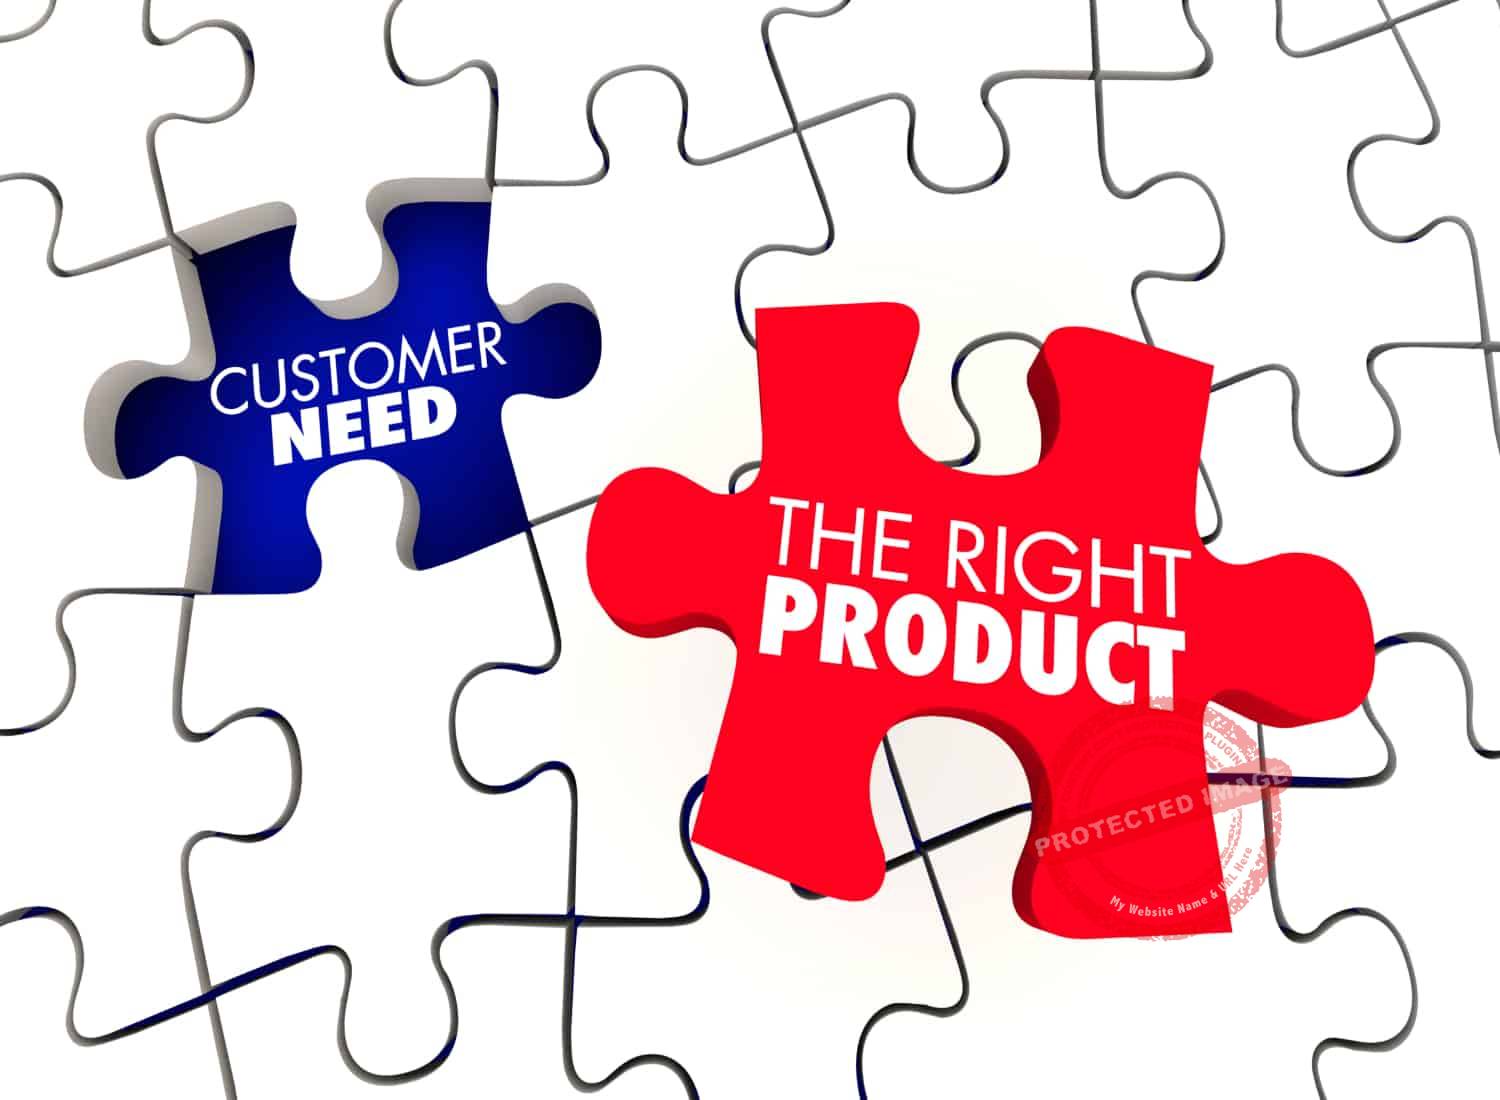 Customer needs. Пазлы безопасность. Products and customers. Right product. Right customer